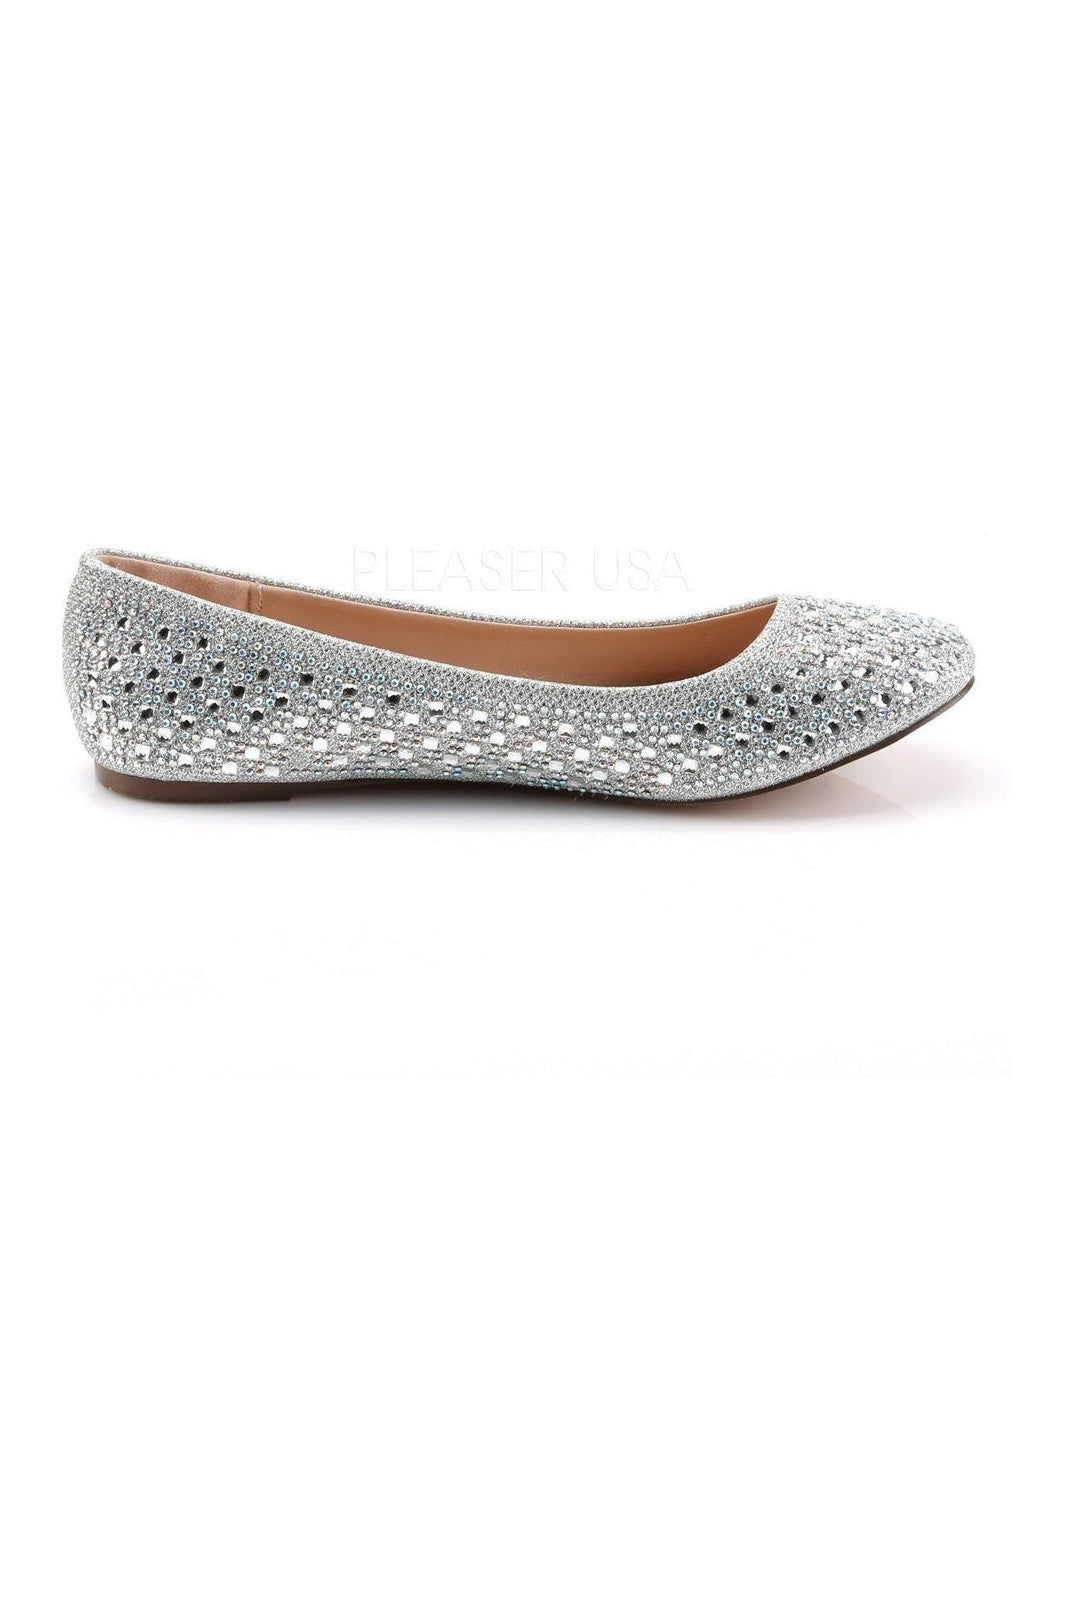 TREAT-06 Flat | Silver Fabric-Fabulicious-Flats-SEXYSHOES.COM